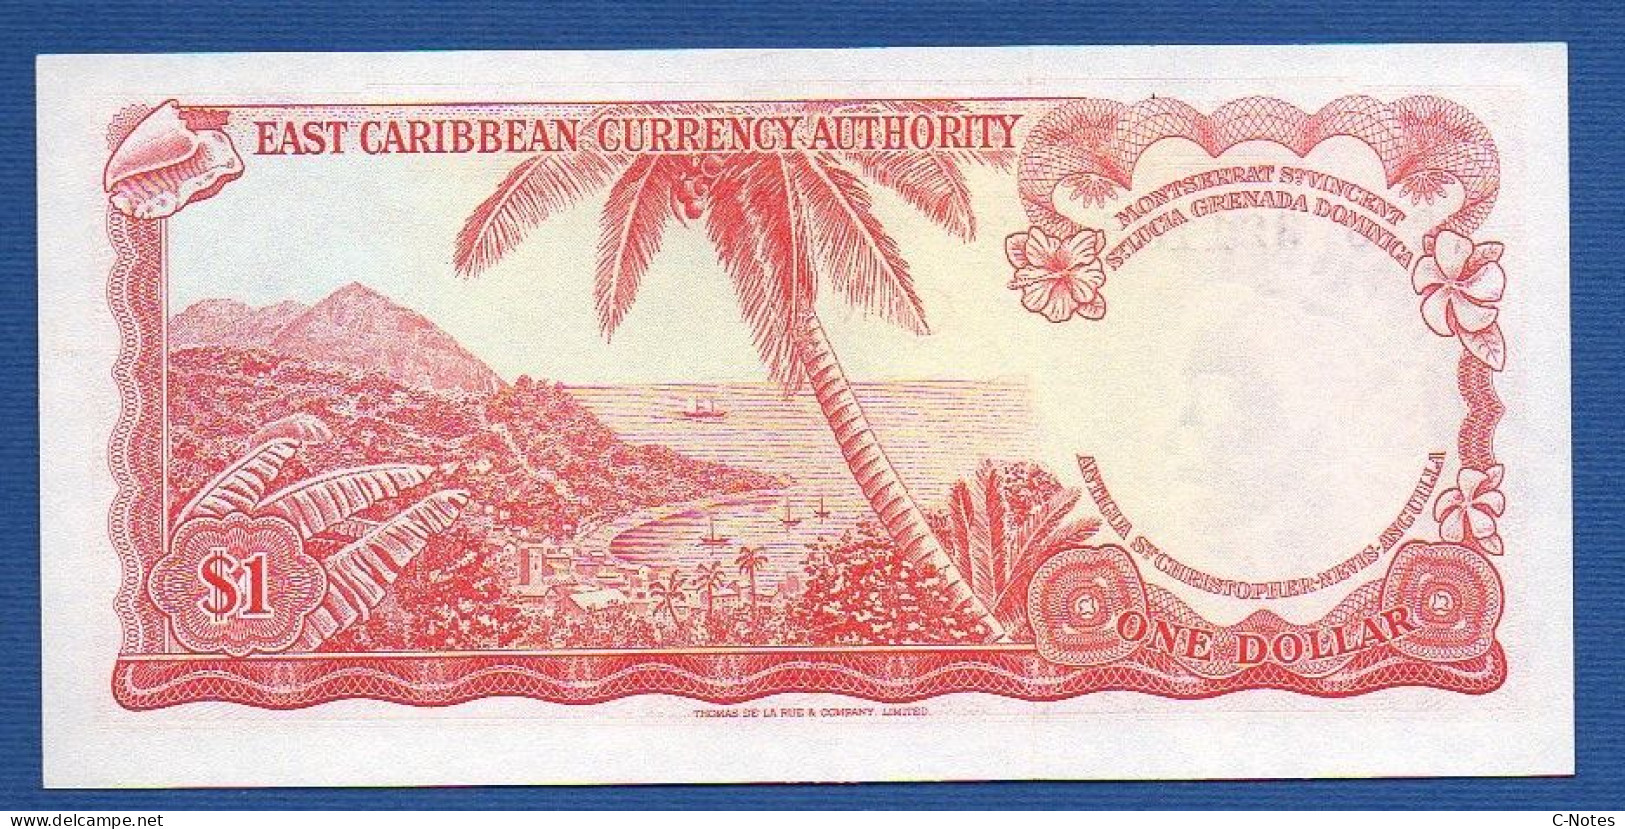 EAST CARIBBEAN STATES - St. Lucia - P.13l – 1 Dollar ND (1965) UNC, S/n C10 321183 - Caraïbes Orientales